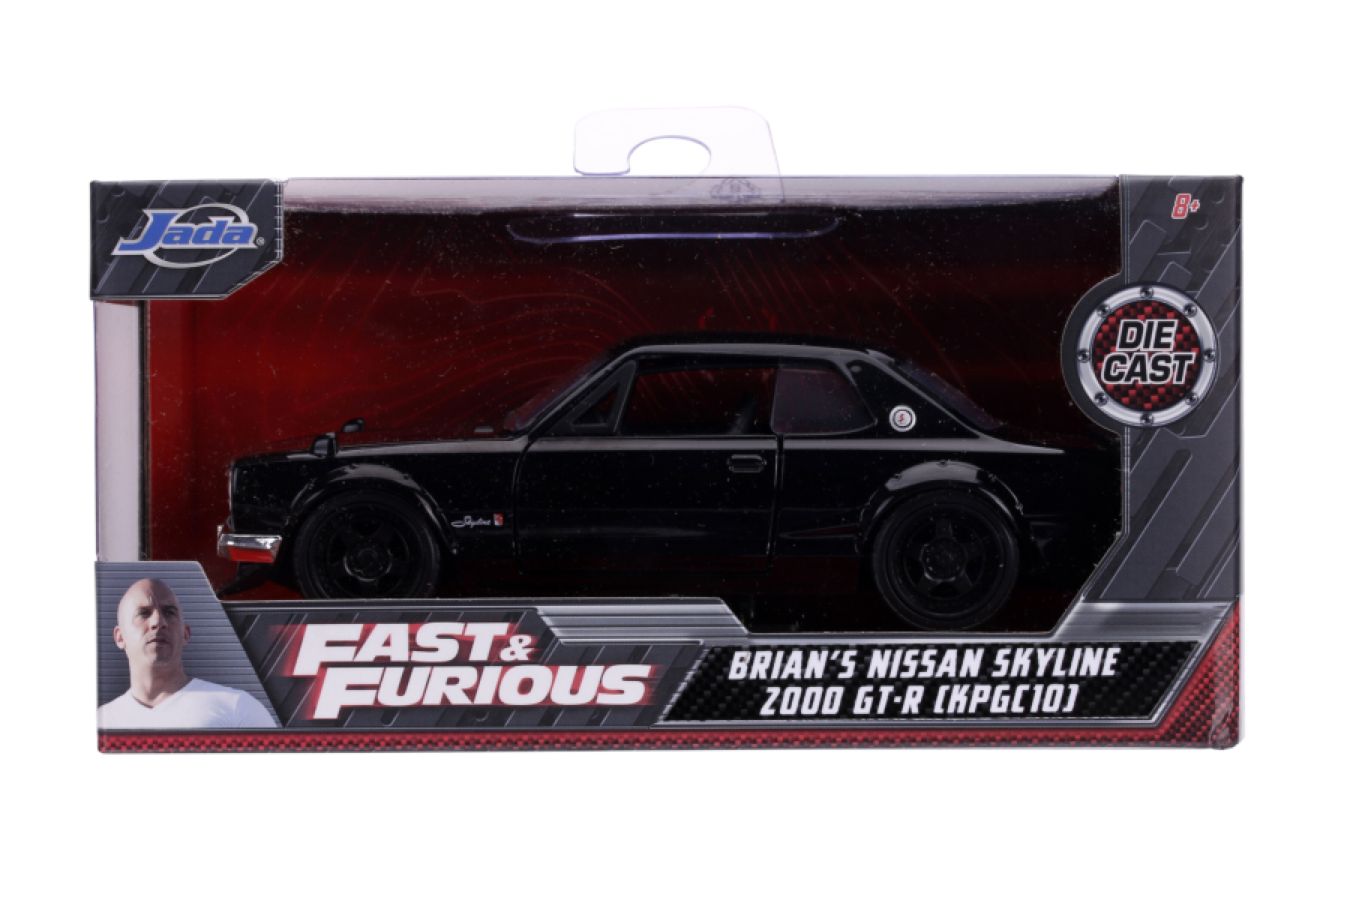 Fast and Furious - Brian's '71 Nissan Skyline 2000 GT-R 1:32 Scale Hollywood Ride